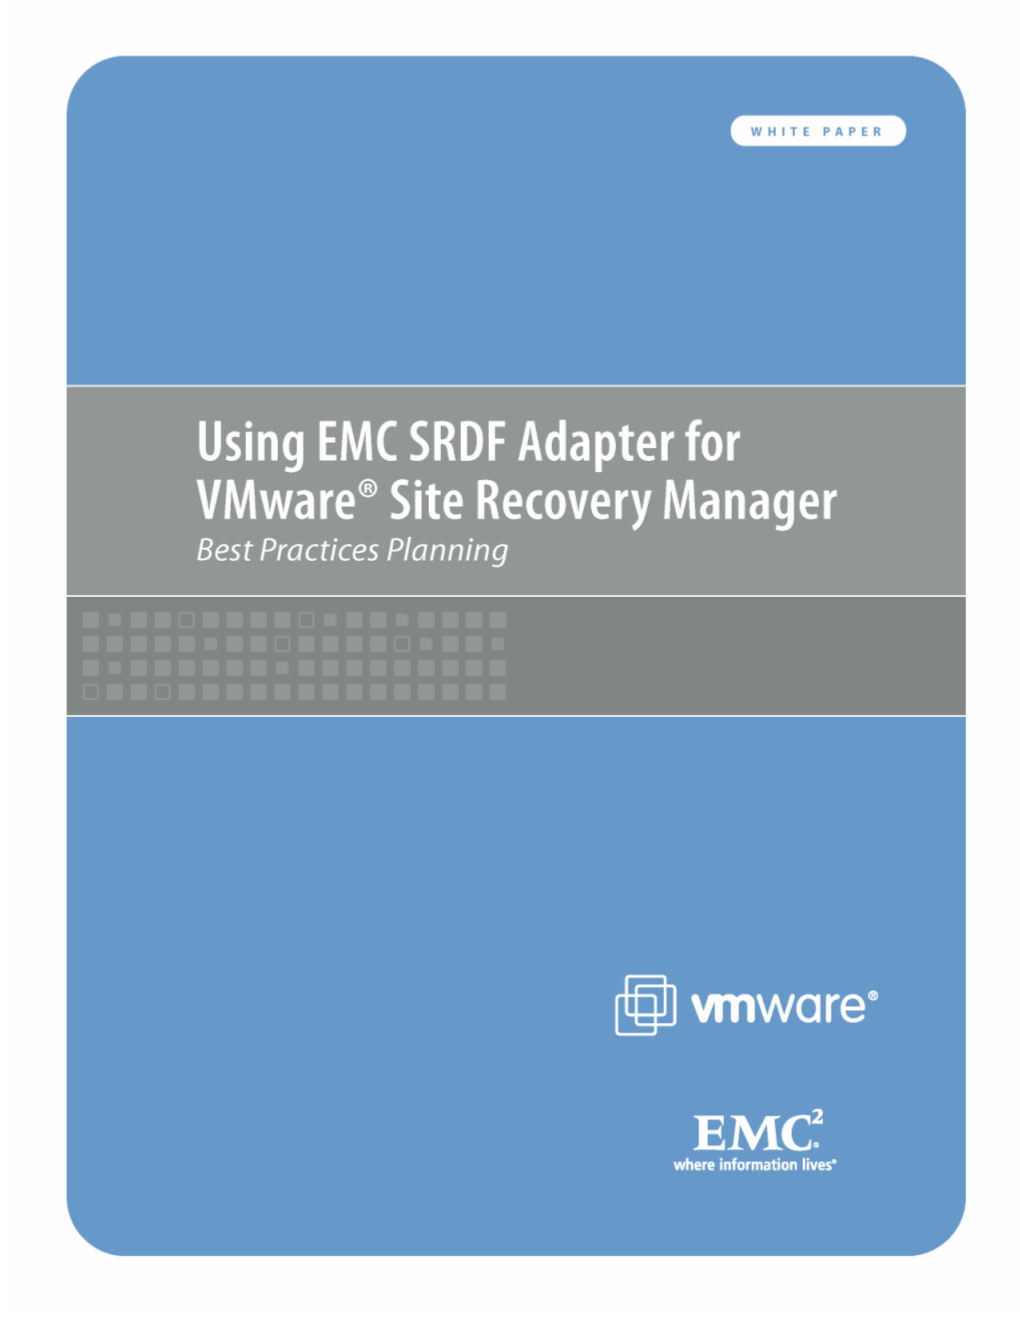 Using EMC SRDF Adapter for Vmware Site Recovery Manager